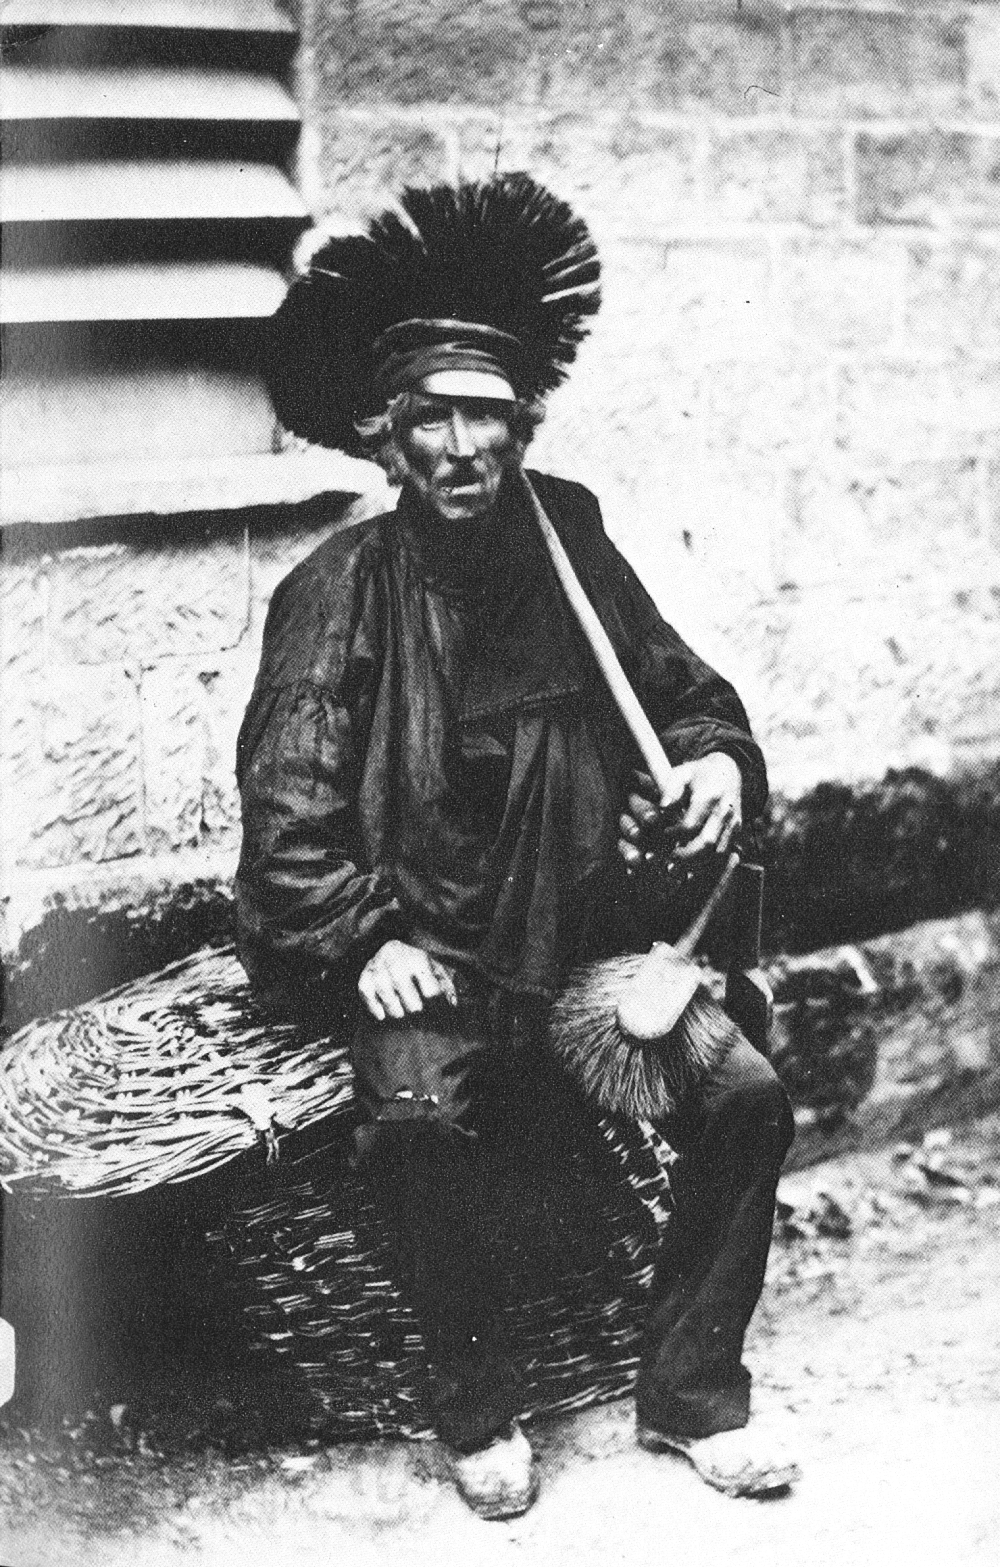 Chimney Sweep in 1850